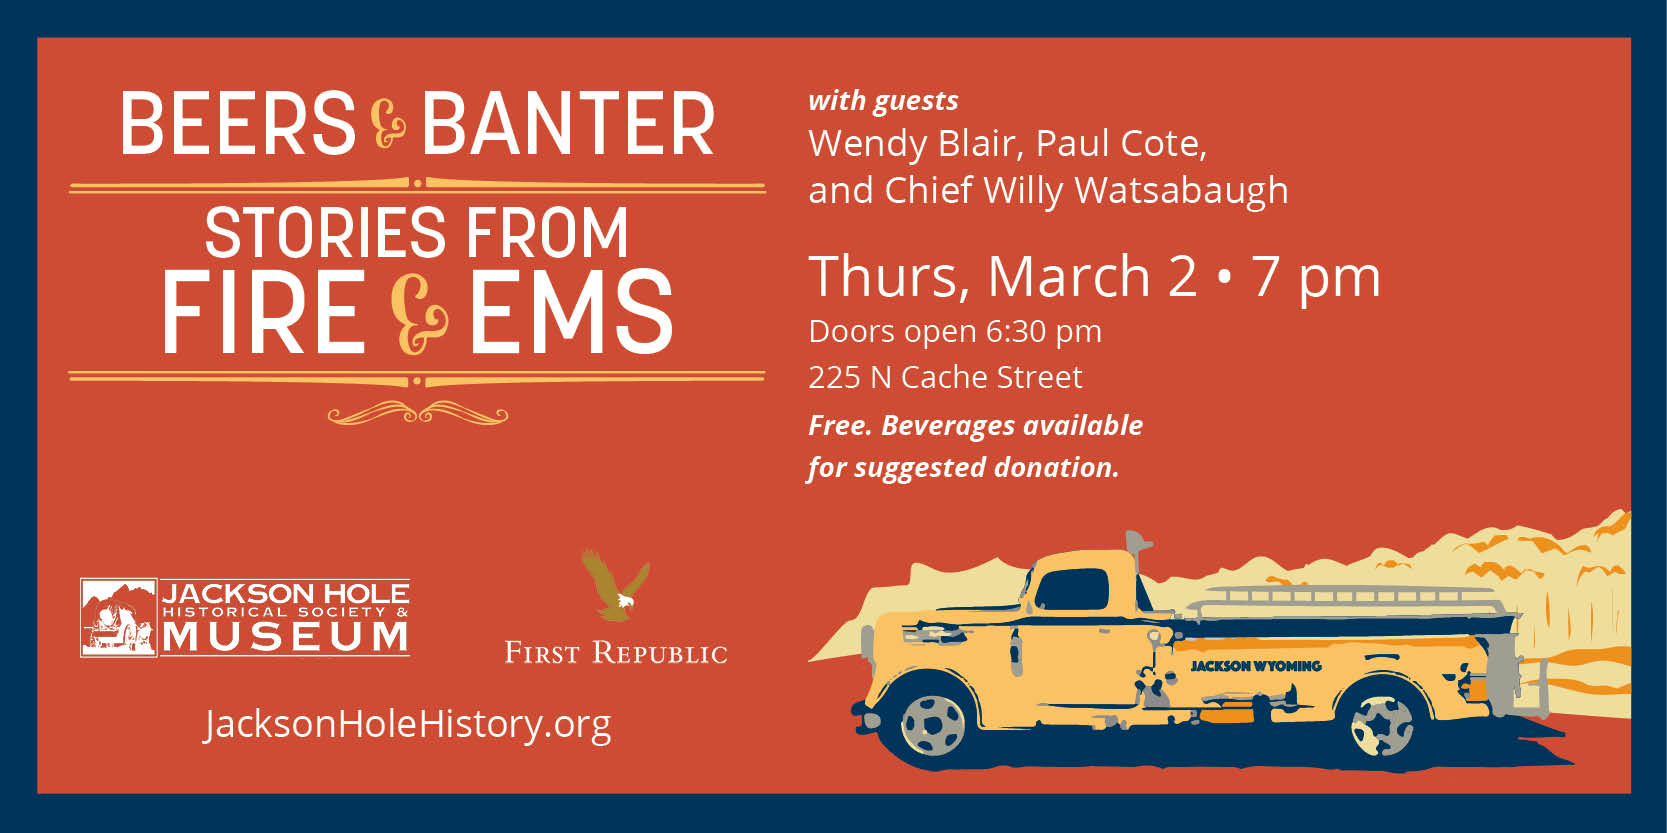 Beers & Banter Stories from Fire & EMS